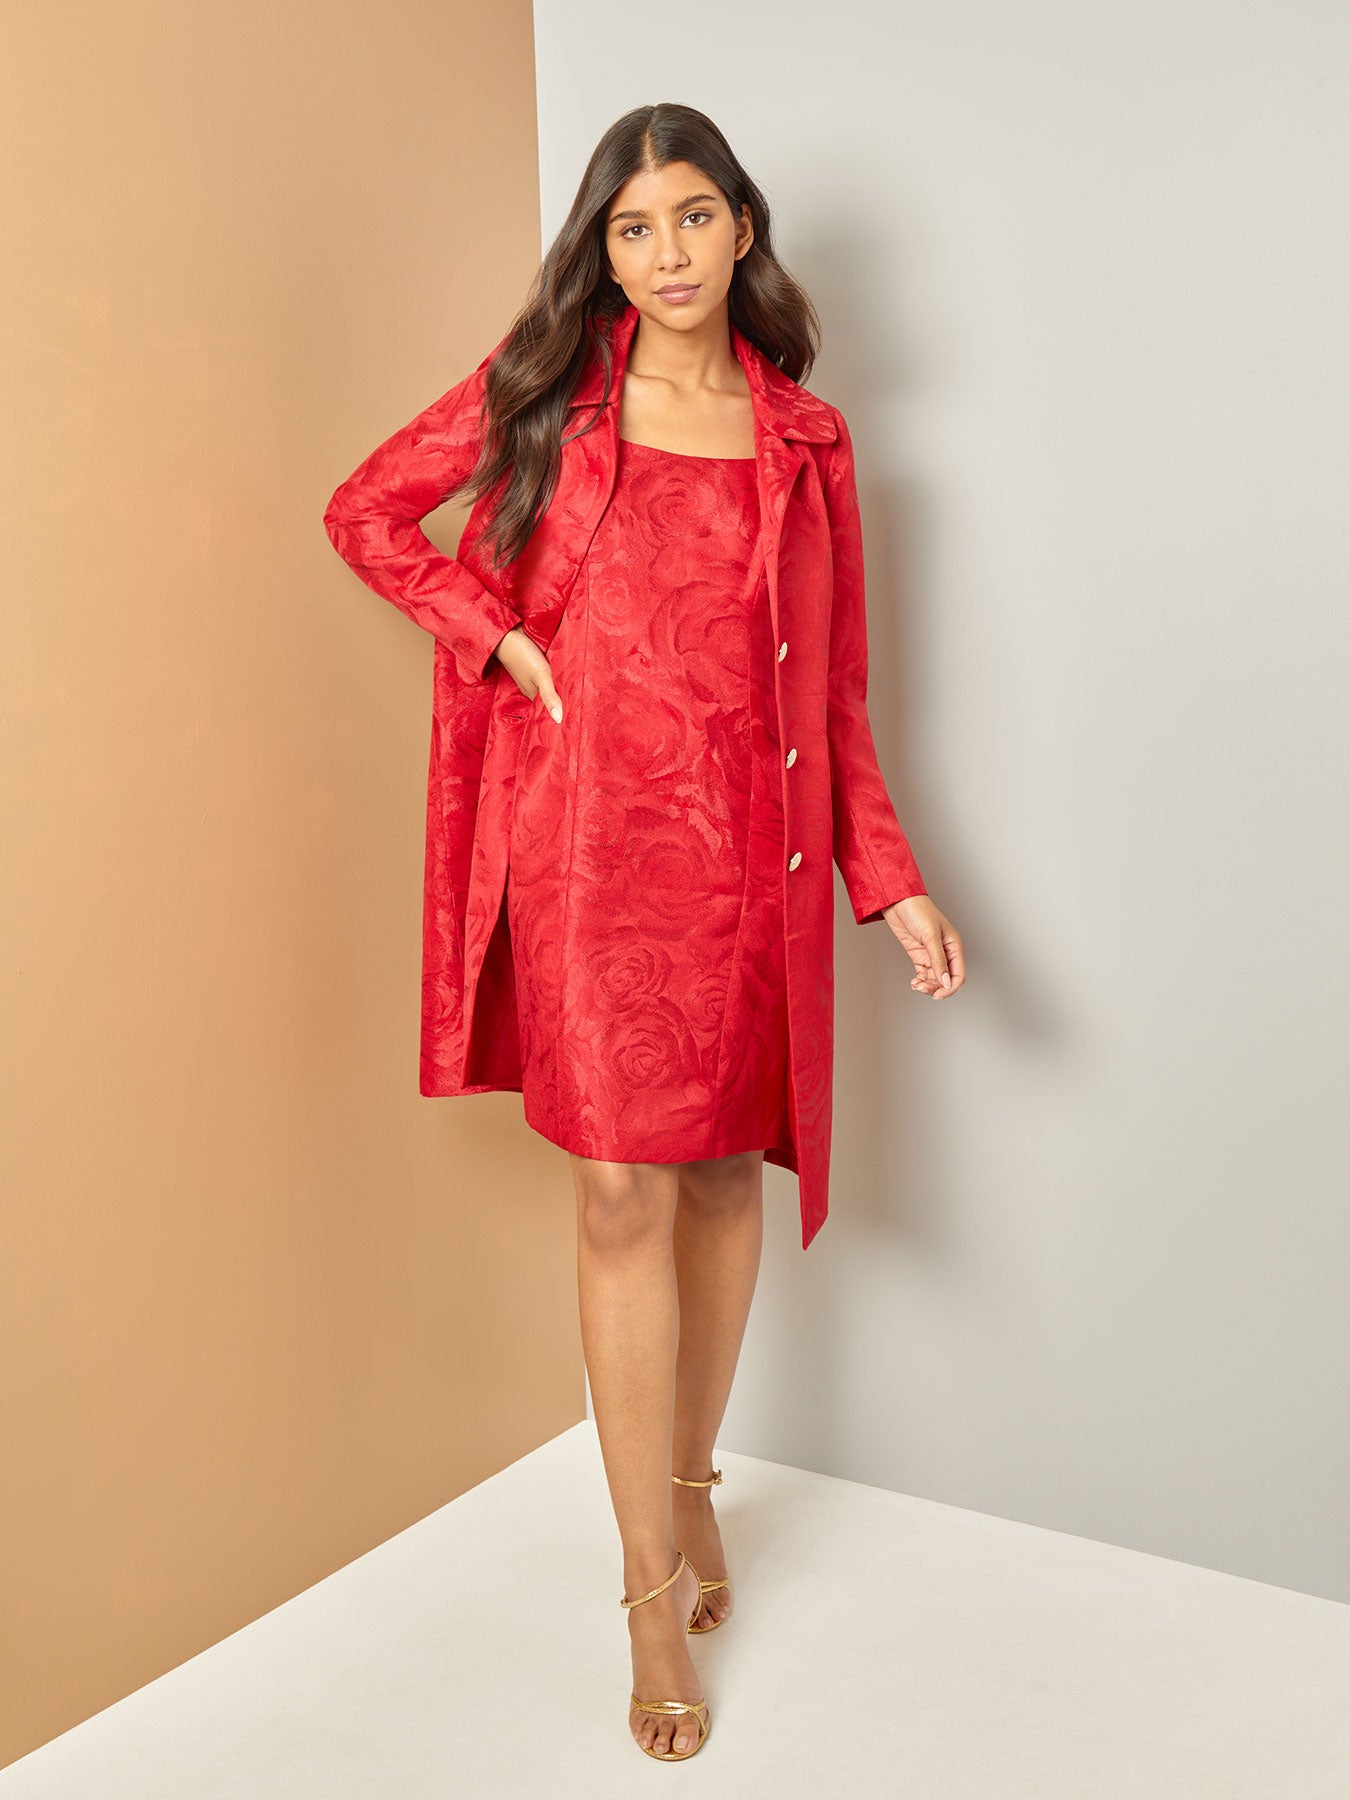 Stunning Red Dresses for Special Occasions by Kassie